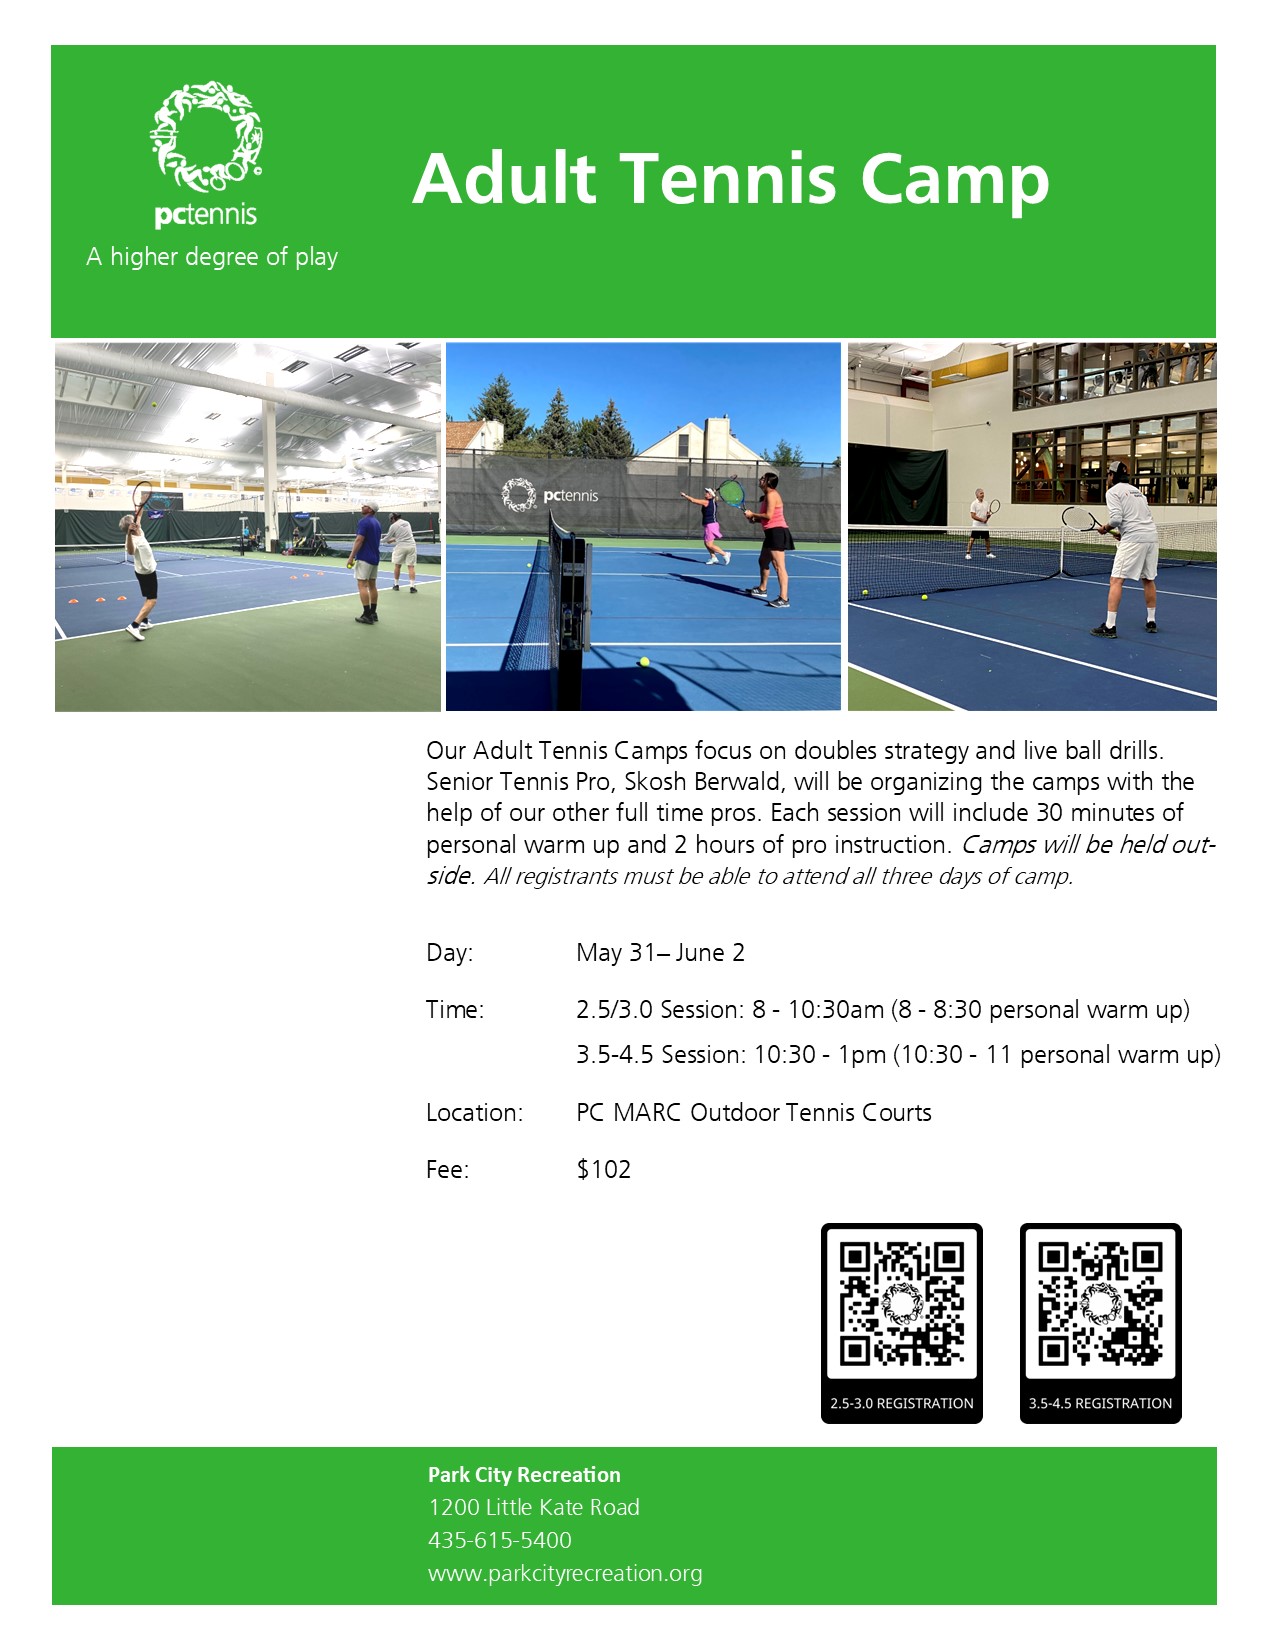 Adult Tennis Summer Camps